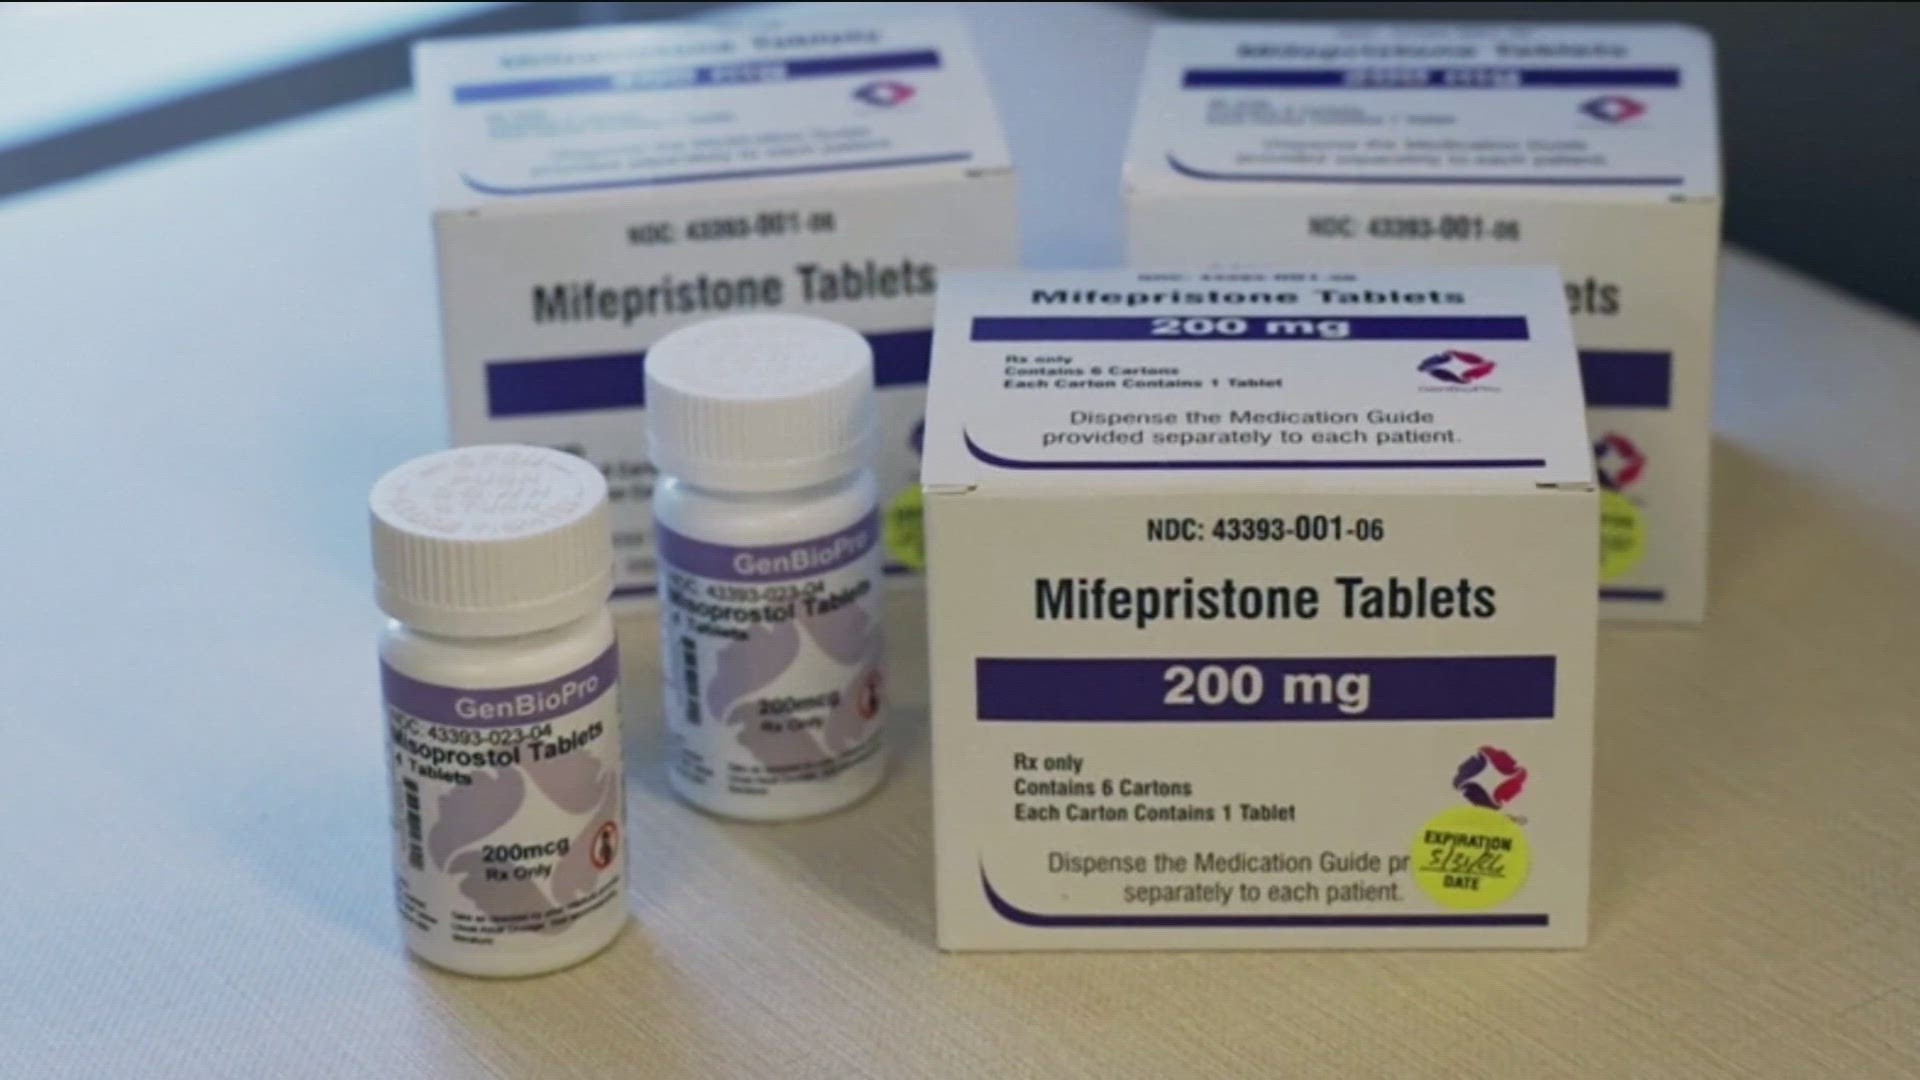 The Supreme Court signaled on Tuesday it was likely to continue allowing mifepristone abortion pill access, despite challenges by anti-abortion groups.